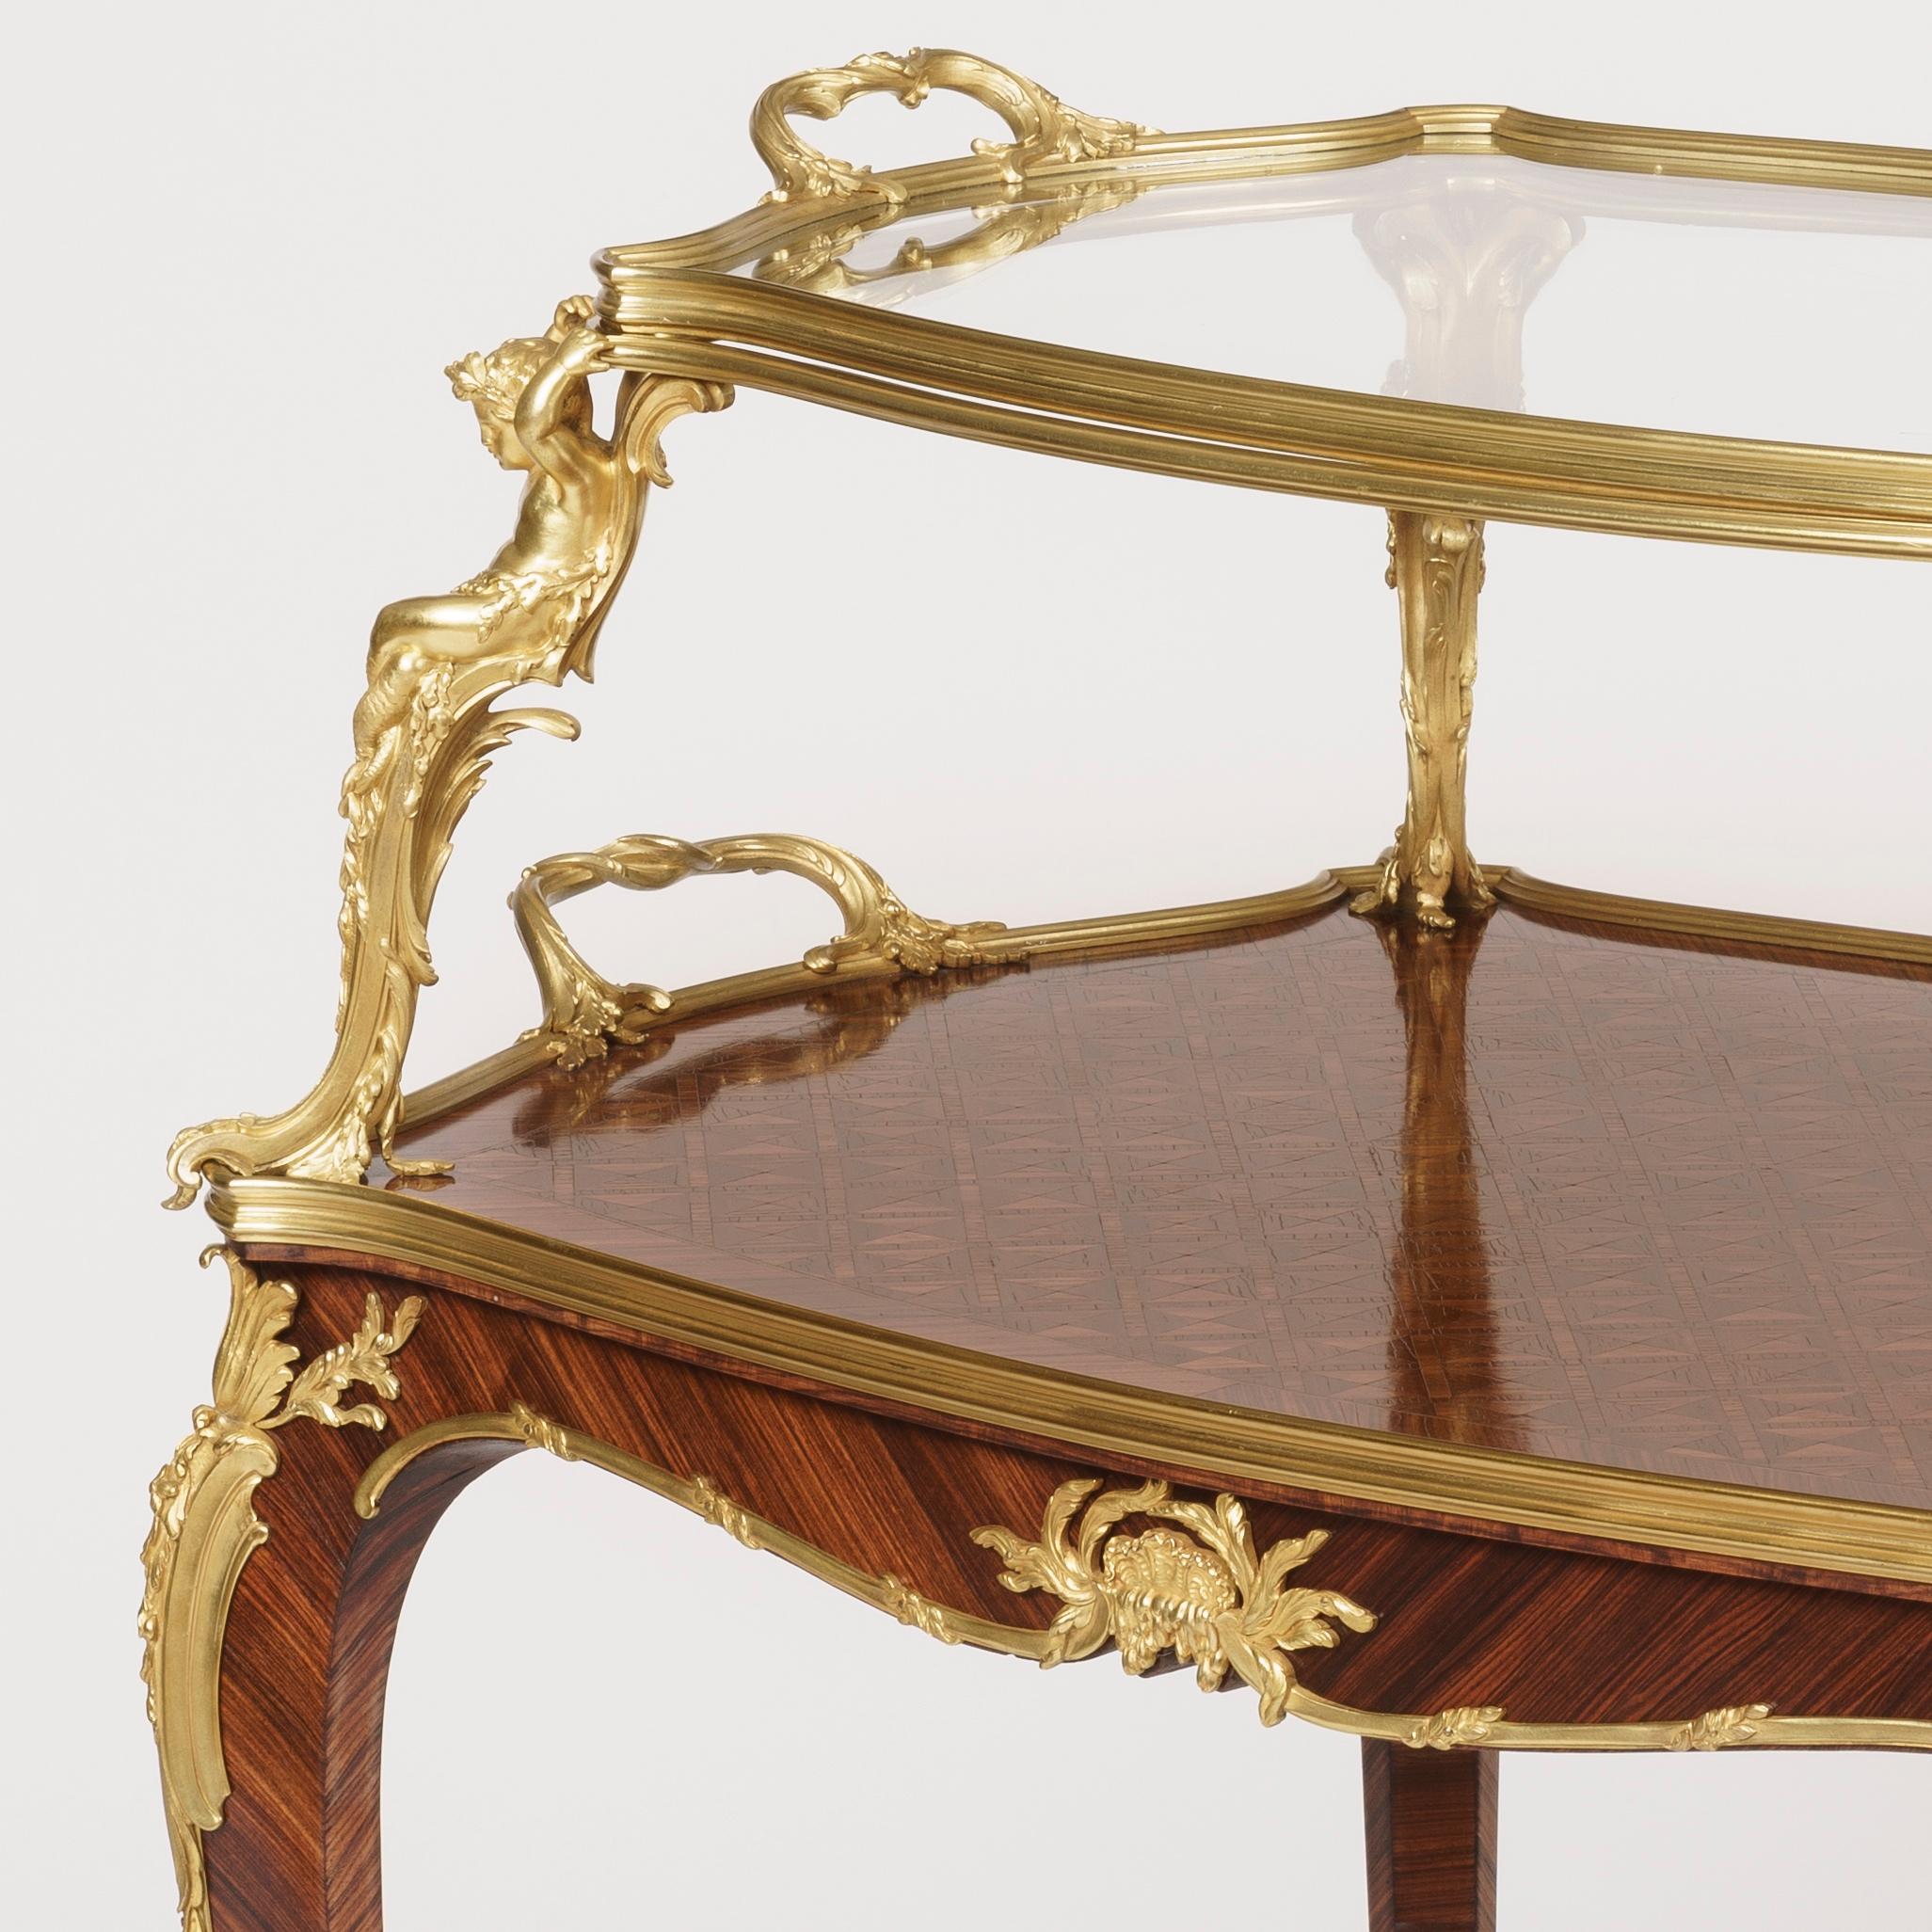 Early 20th Century Ormolu-Mounted Tray Table in the Louis XV Style by François Linke